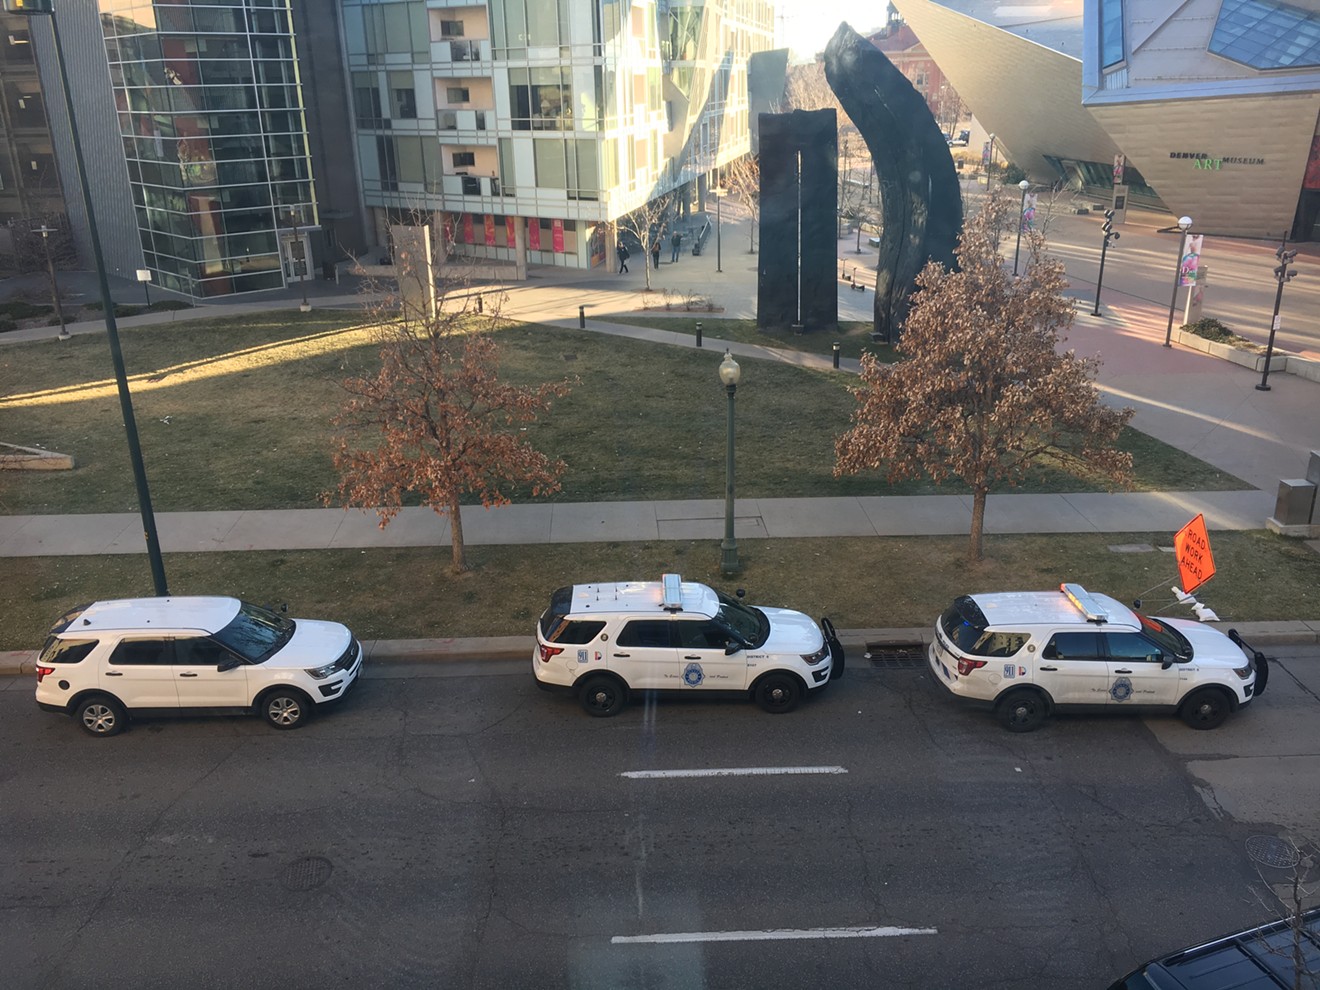 Police parked outside the Denver Art Museum on Sunday afternoon.